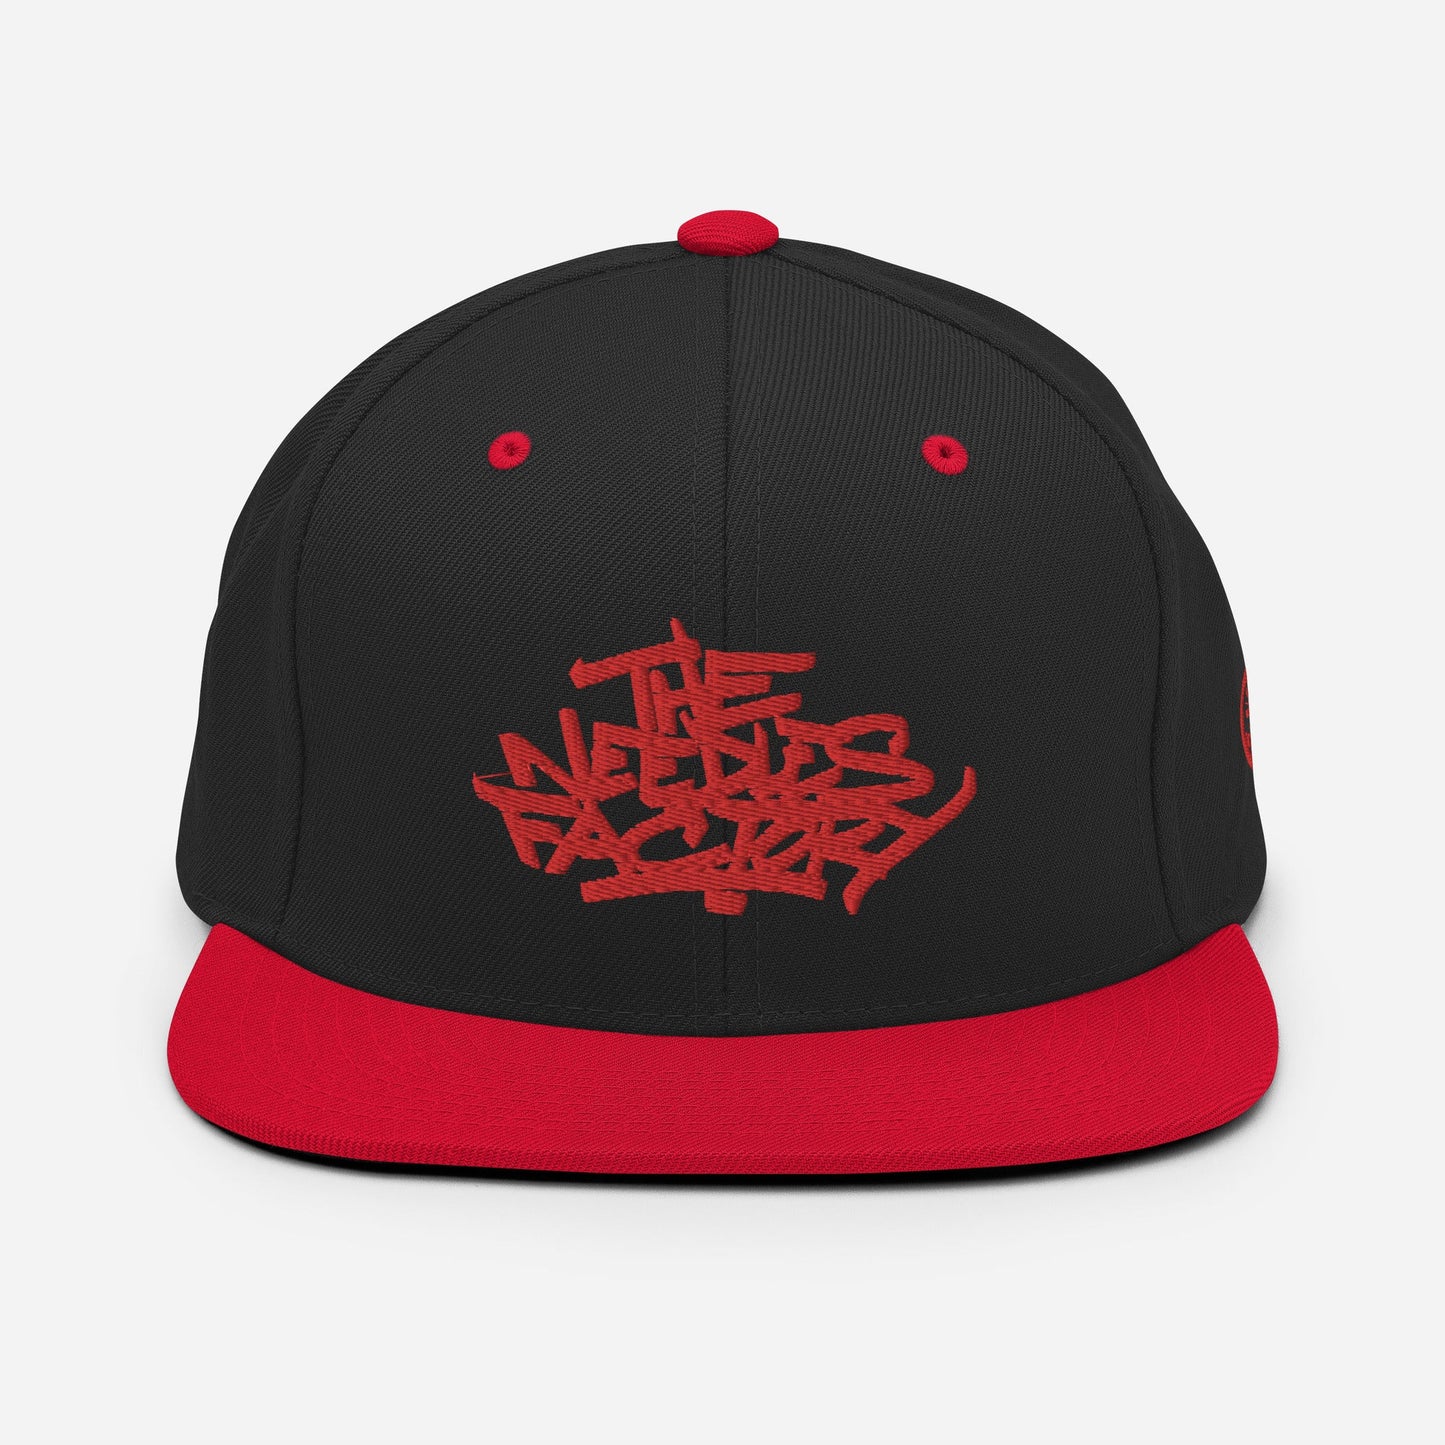 Casquette Snapback Brodé rouge Lettring The Needles Factory Free Shipping - The Needles Factory